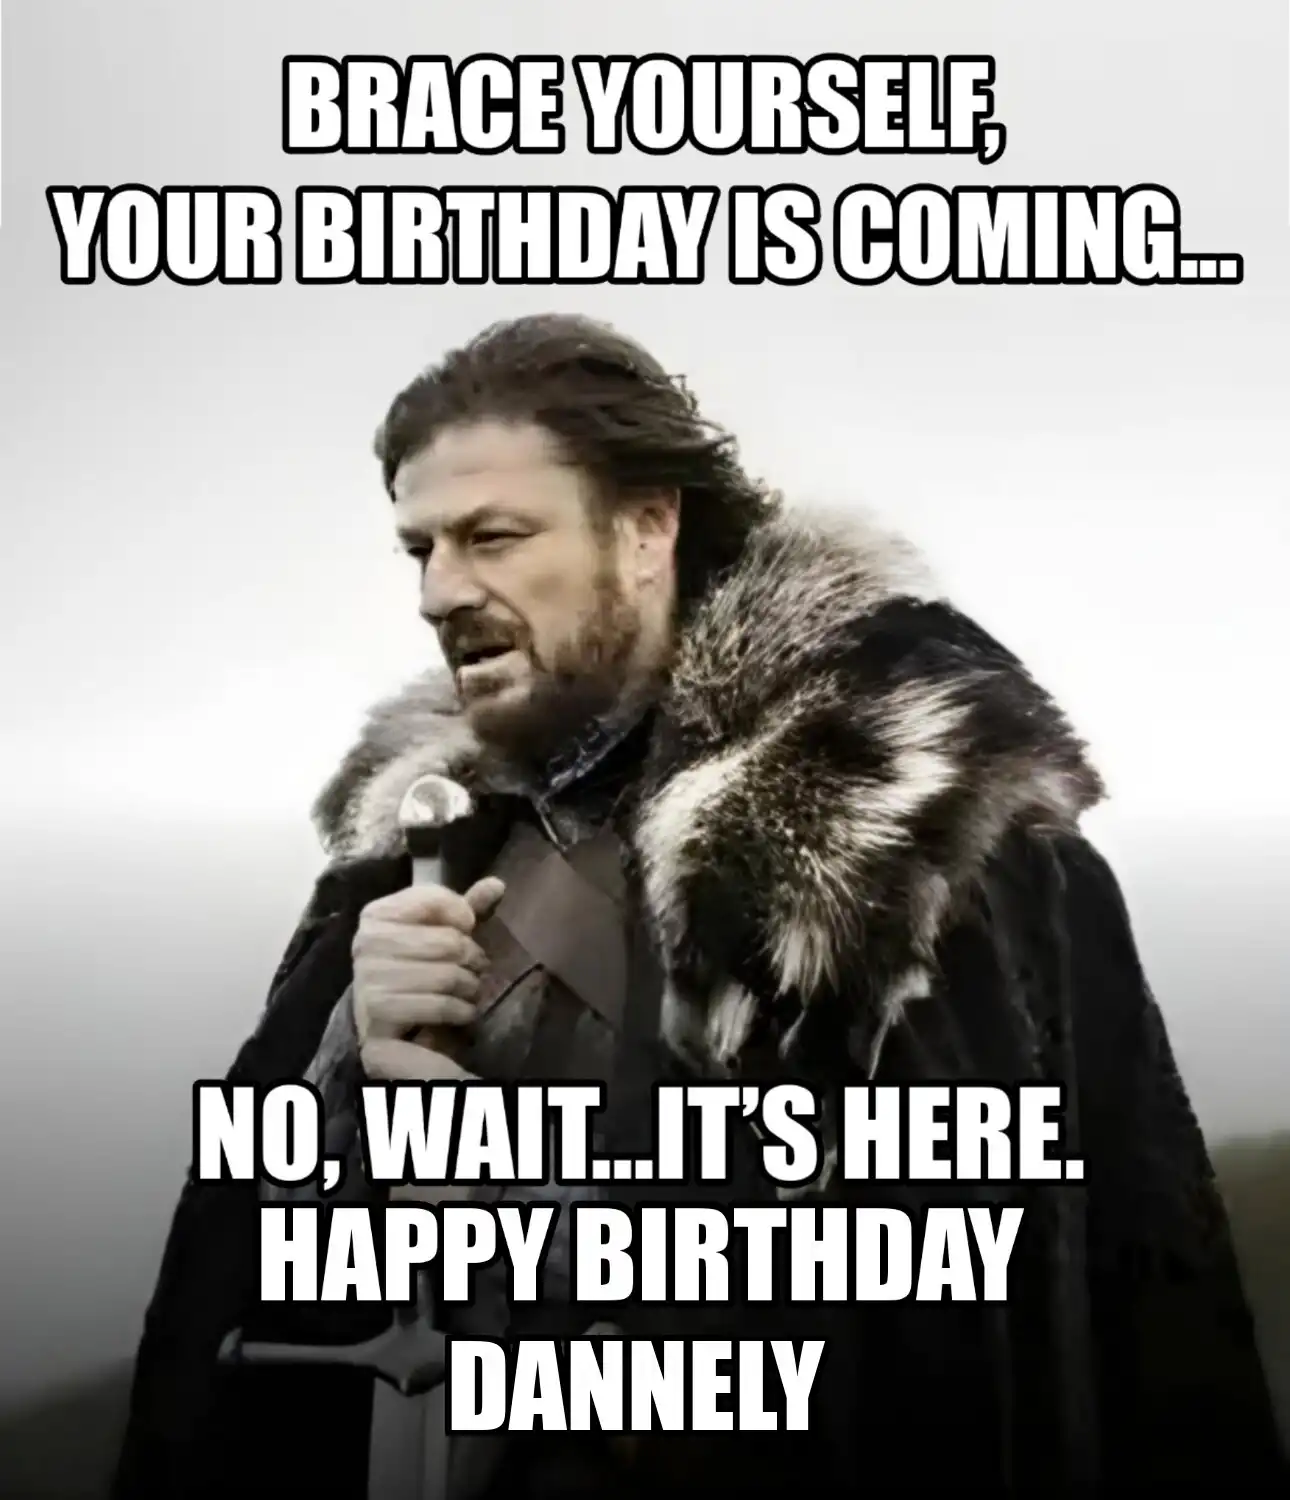 Happy Birthday Dannely Brace Yourself Your Birthday Is Coming Meme